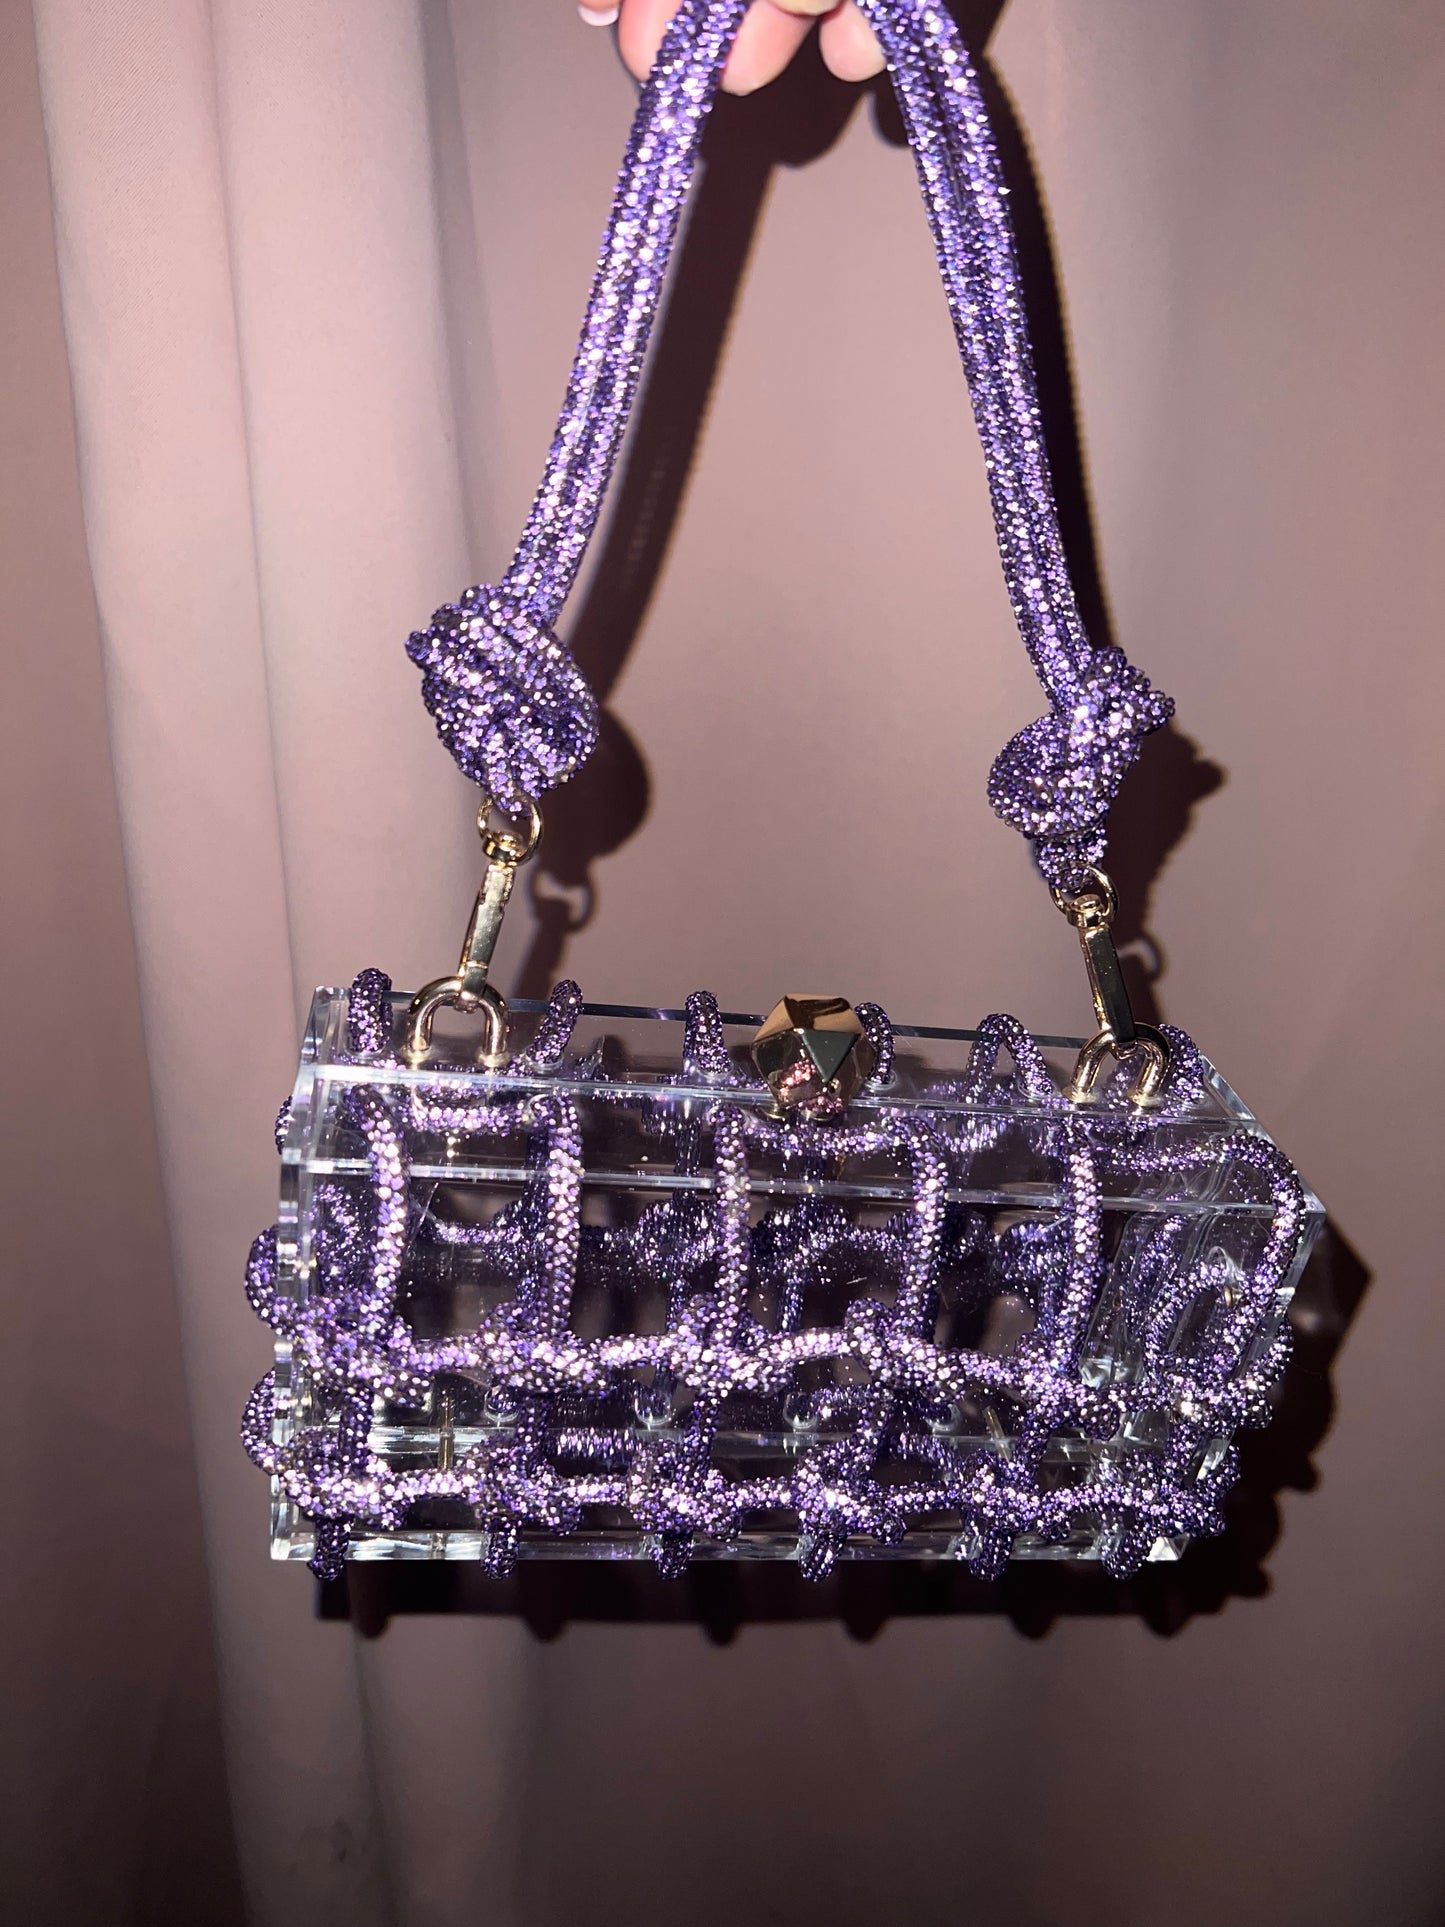 Lilac Crystal Knot Bag (ships in 1-2 weeks)